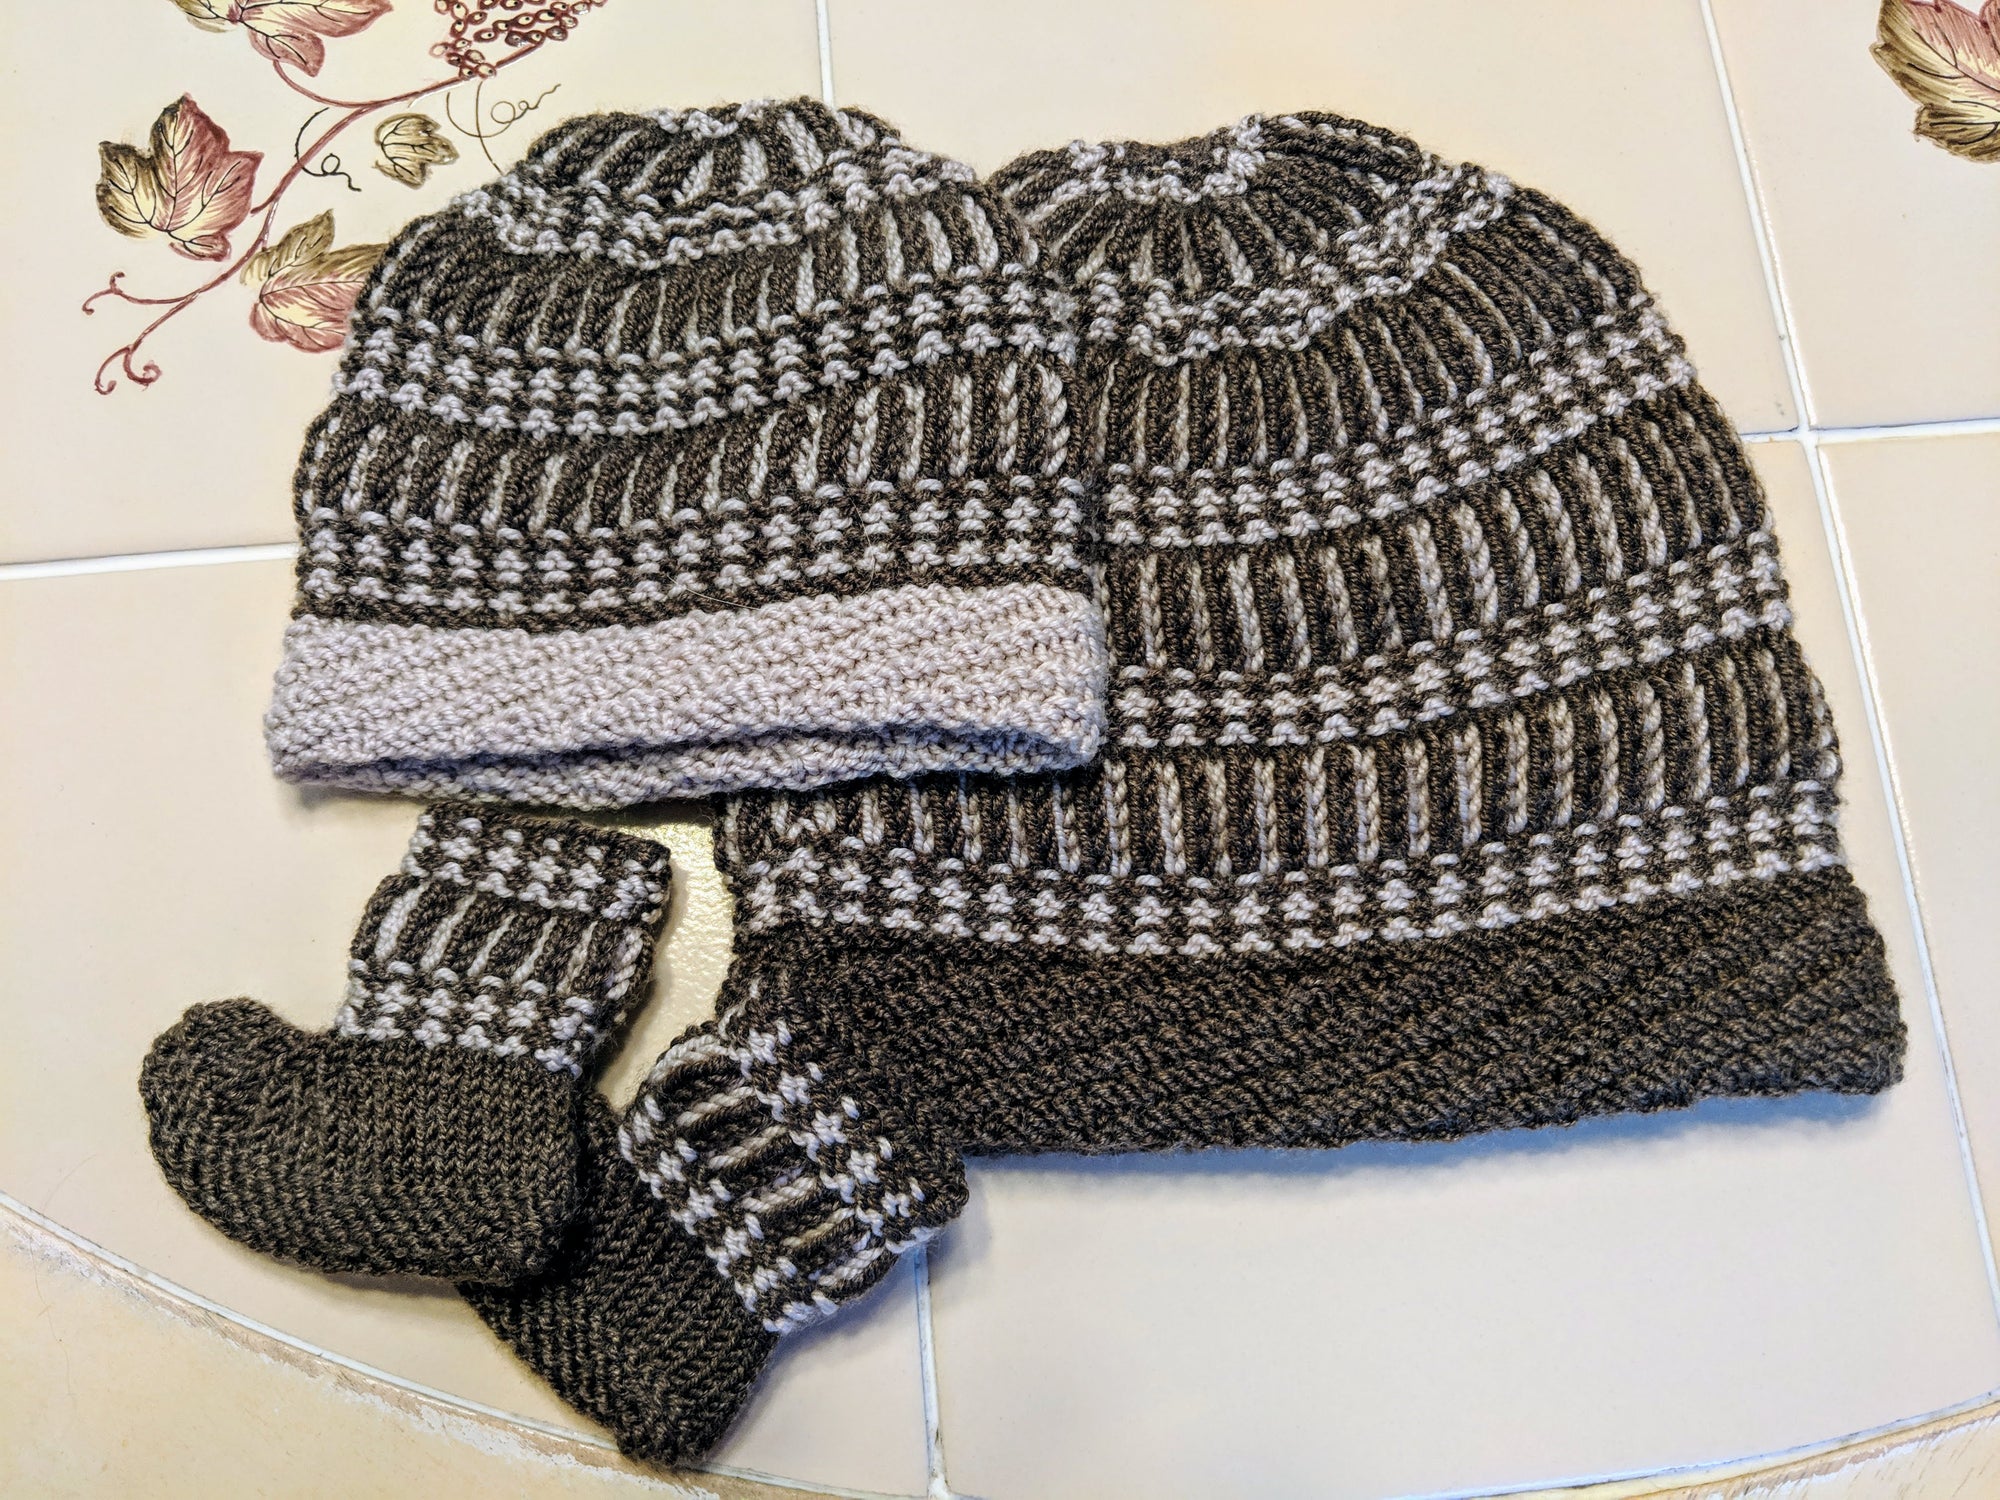 Brioche Knitting and the Rudbeckia Hat by Andrea Mowry